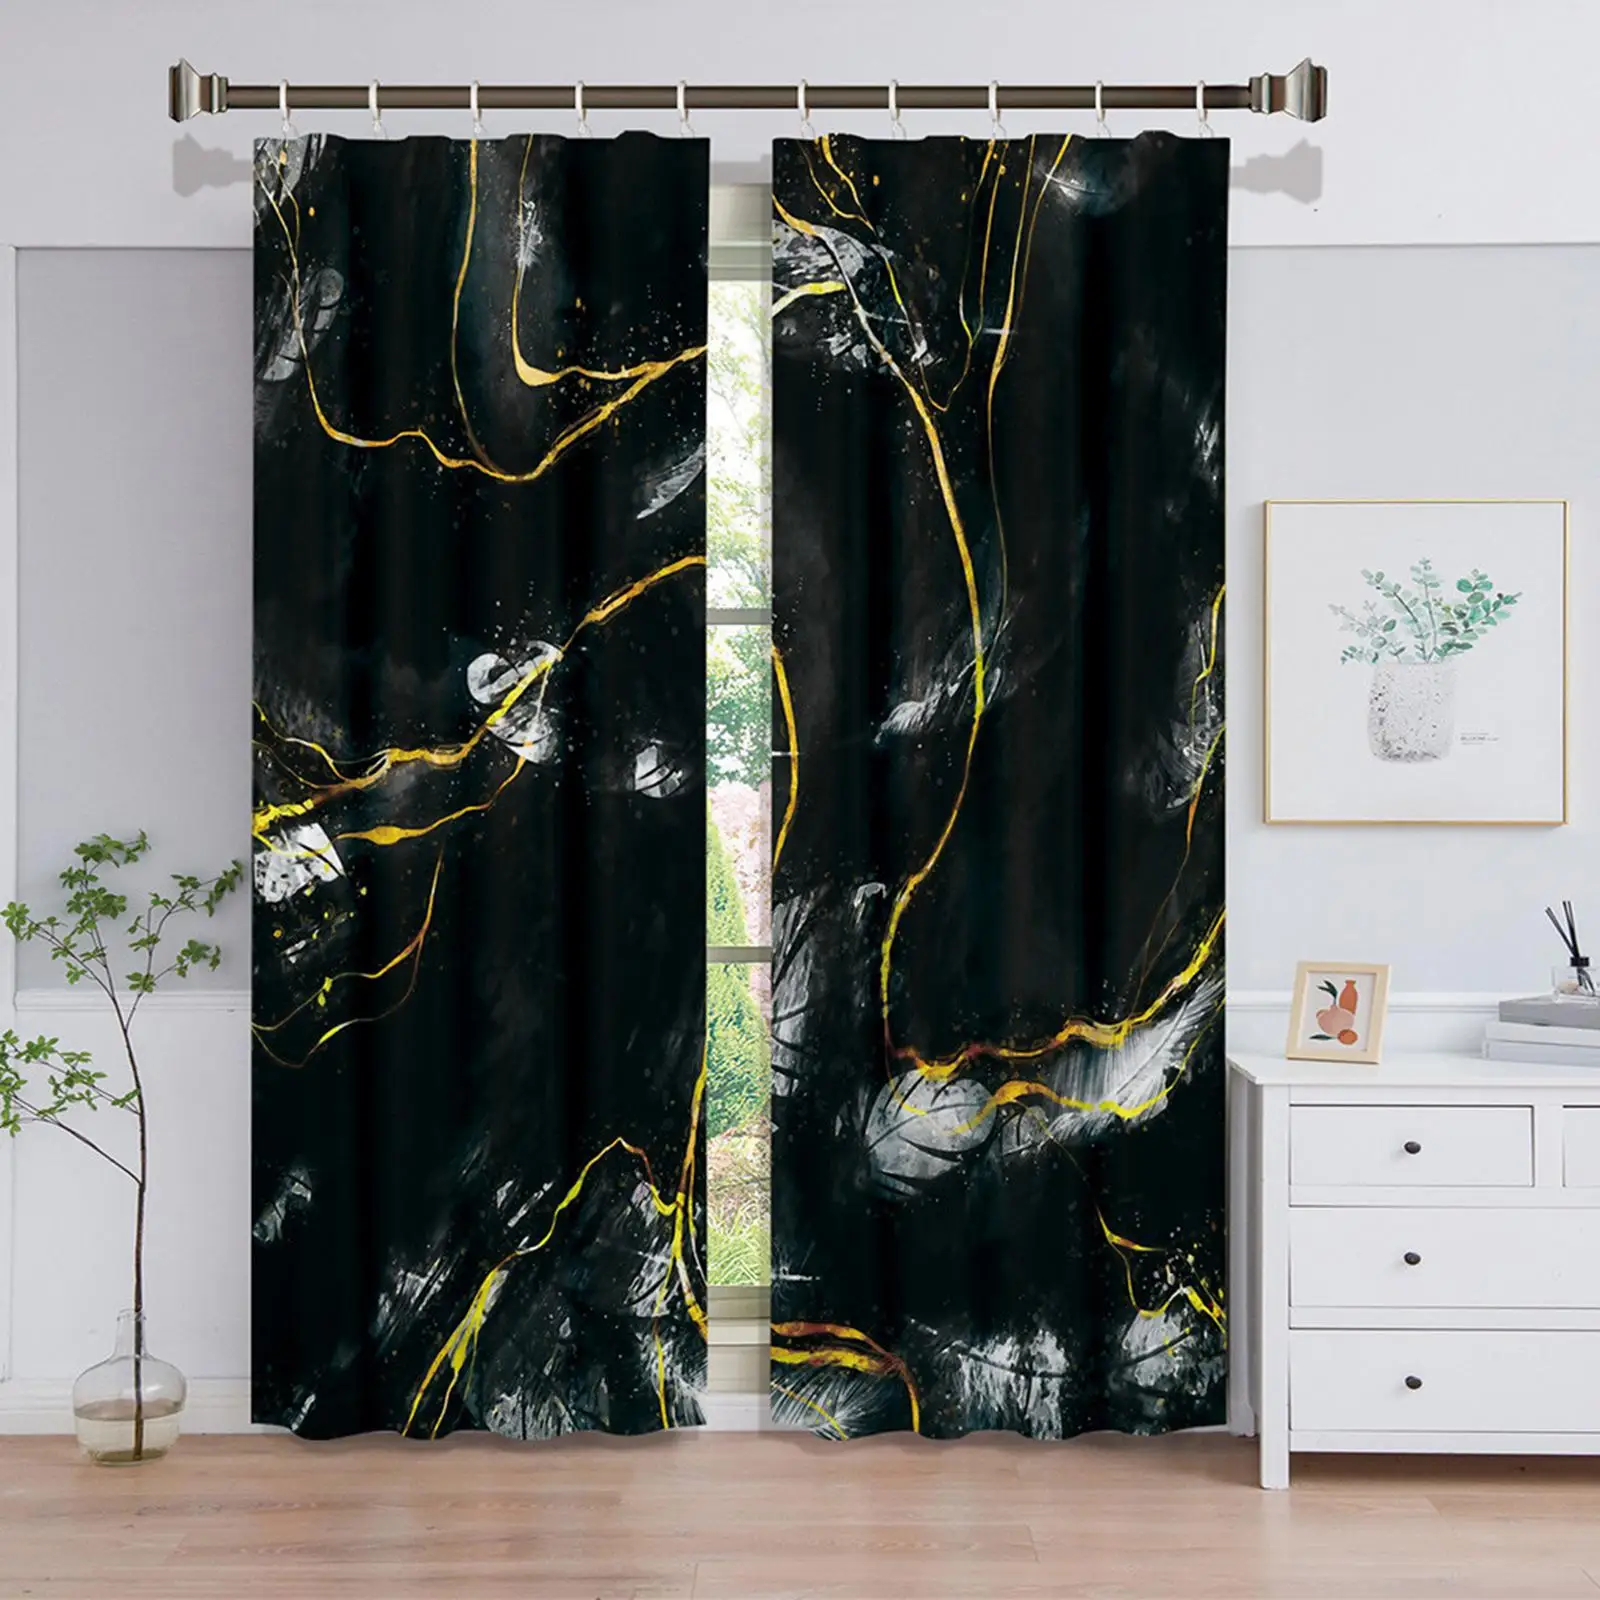 Polyester Fabric Bathroom Shower Curtains Window Curtain for Kitchen Hotel